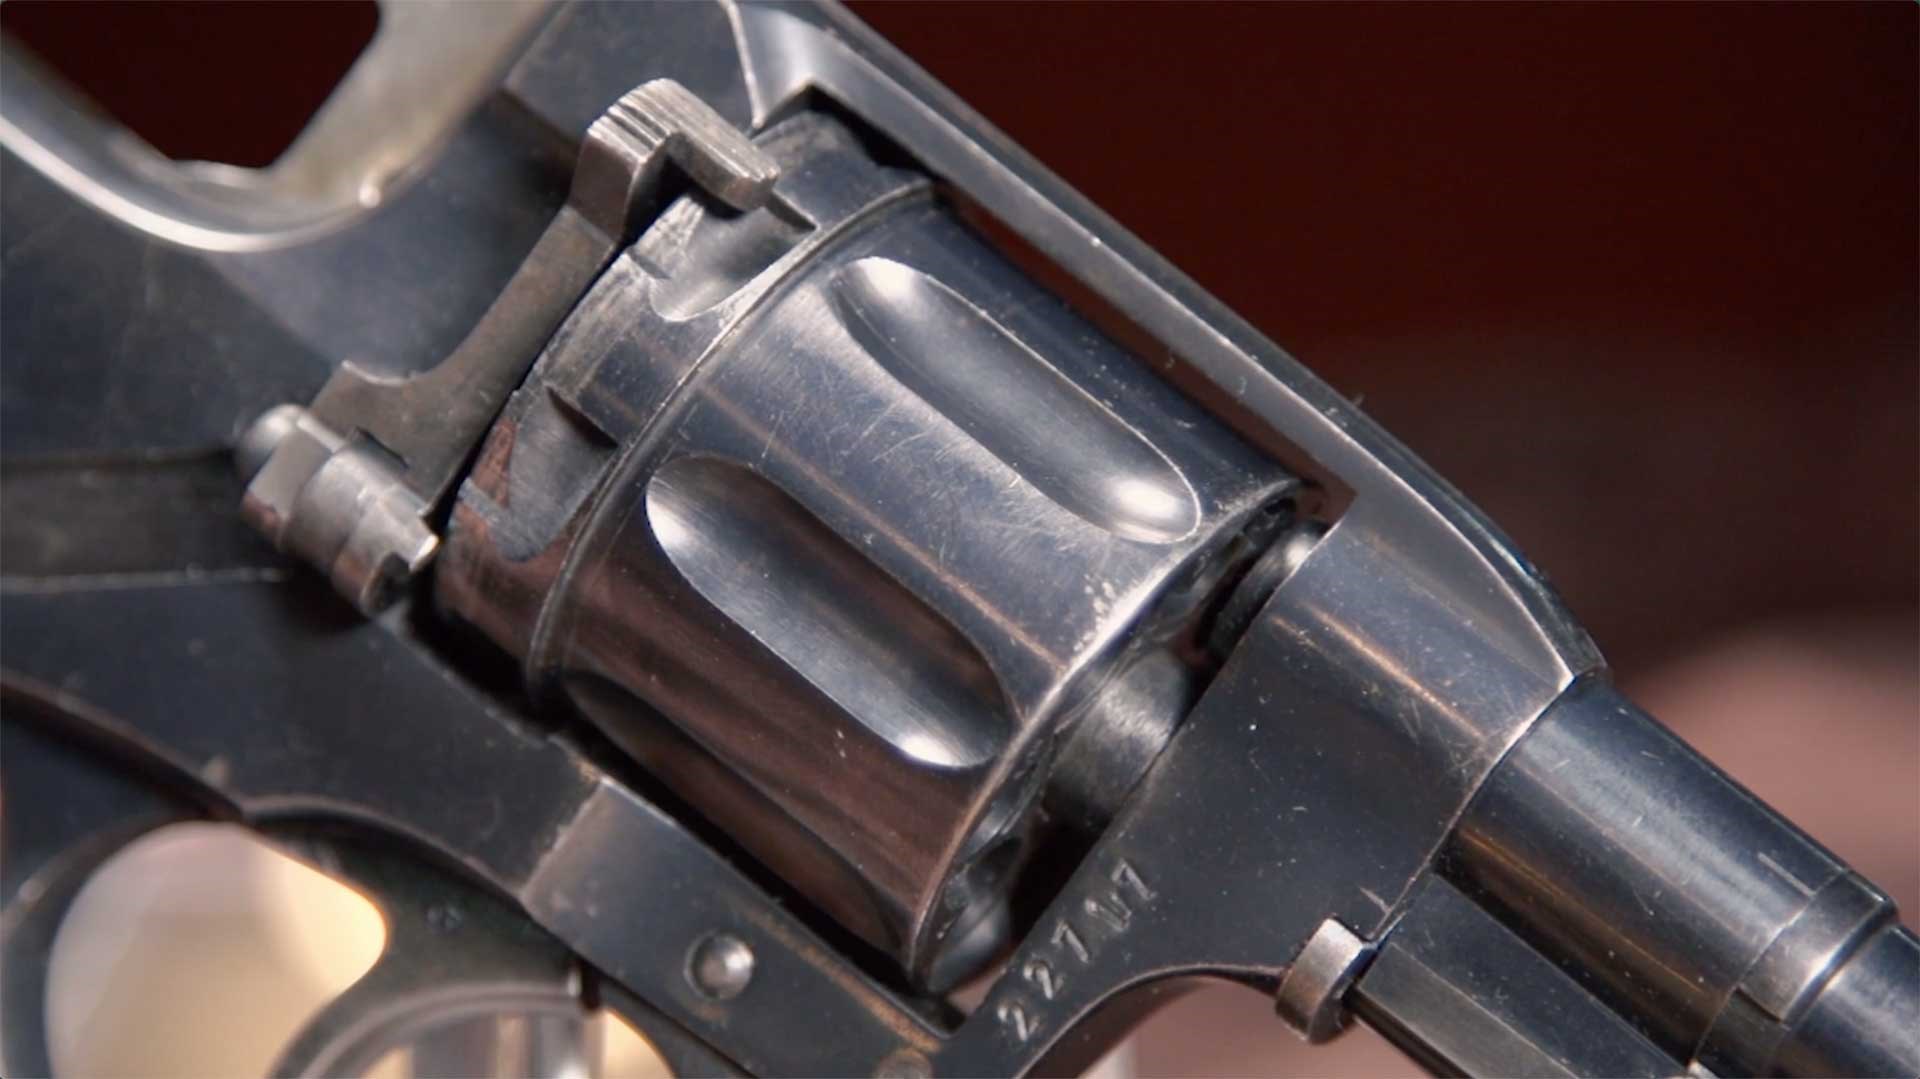 Close-up of the cylinder on the M1895 Nagant revolver.